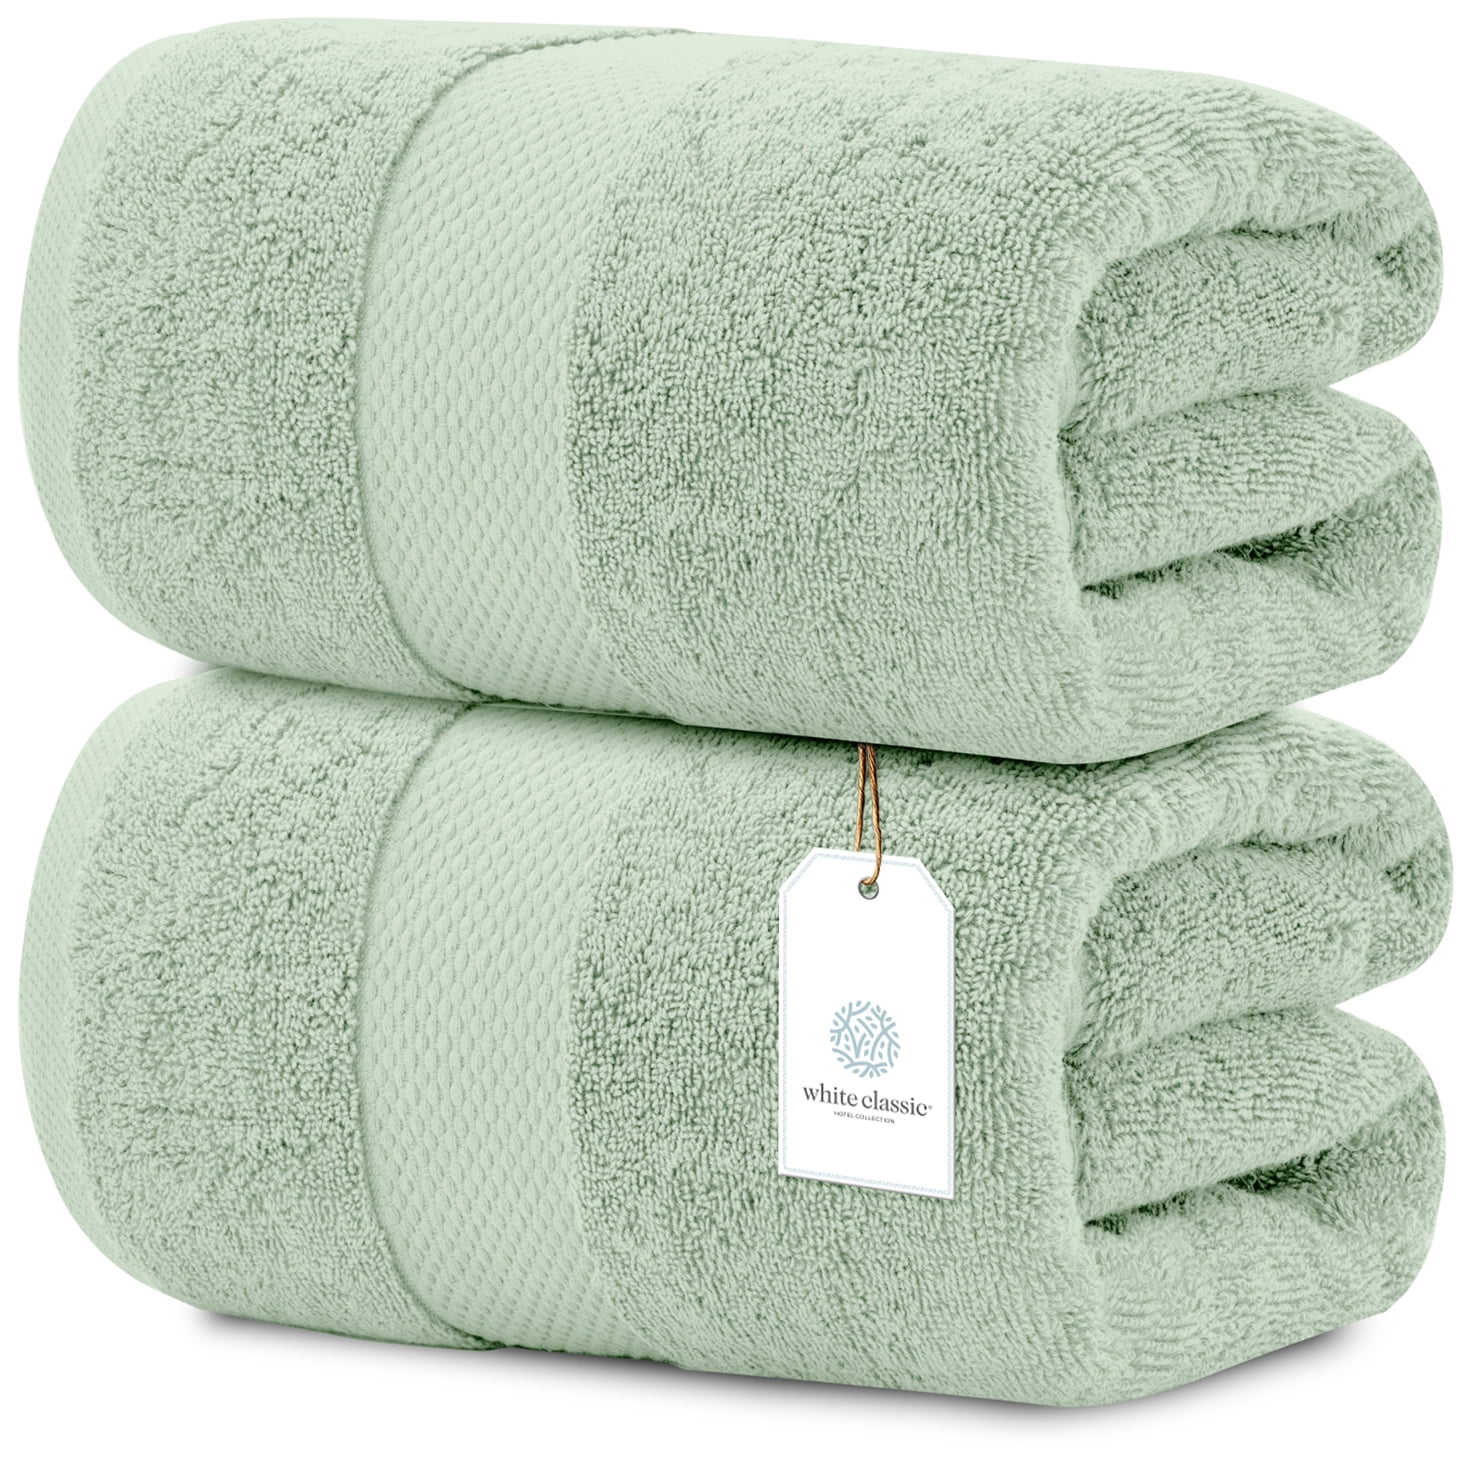 Zenith Luxury Bath Sheets Towels for Adults - Extra Large Bath Towels Set 40x70 inch, 600 gsm, Oversized Bath Towels Cotton, Bath Sheets , XL Towel